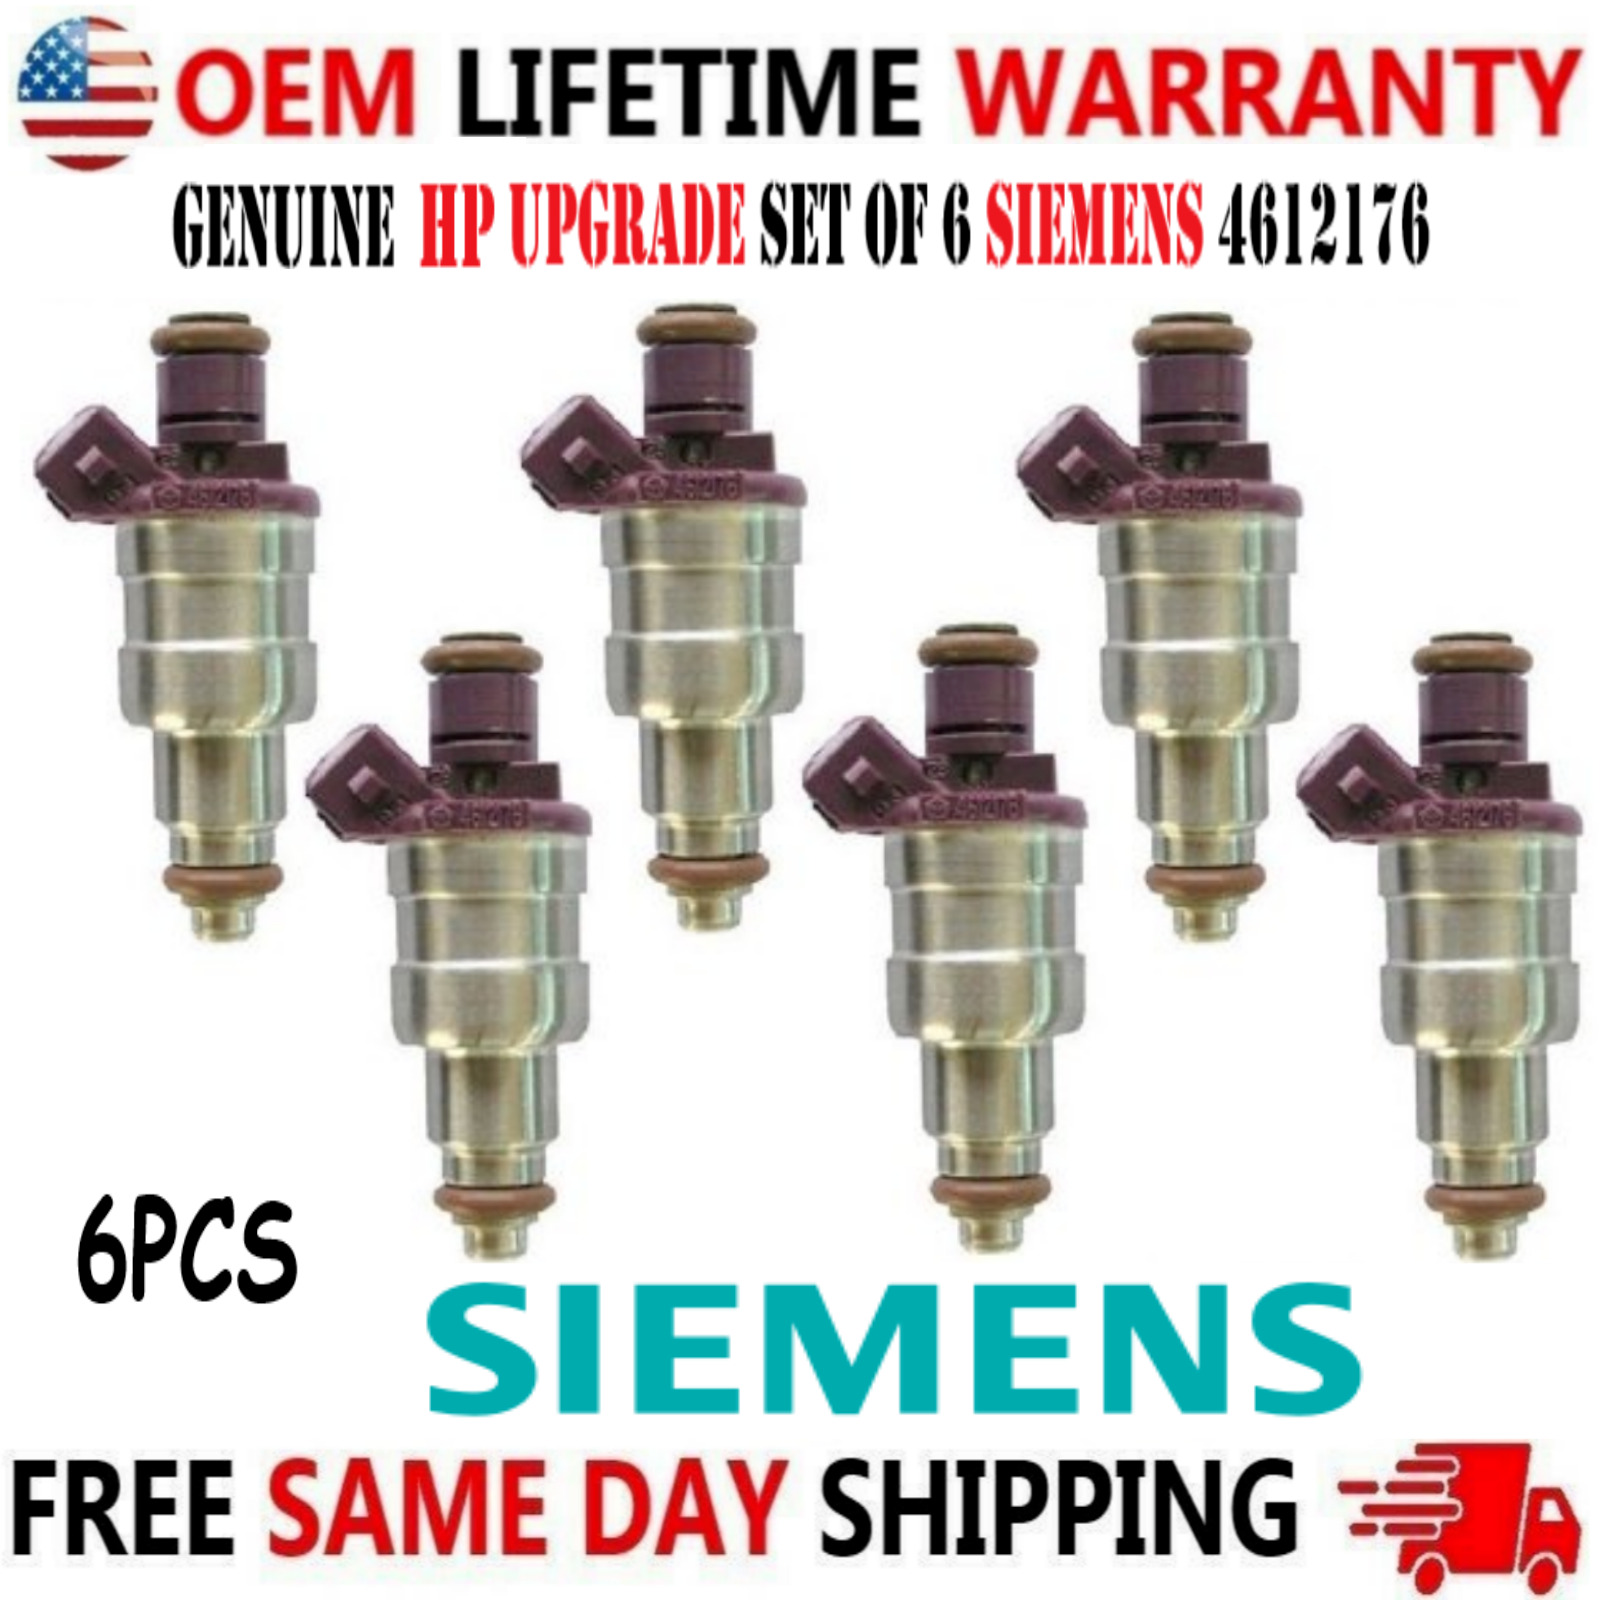 Genuine Fuel Injectors for 1992-93 Chrysler Town & Country 3.3L V6 mpn# 4612176